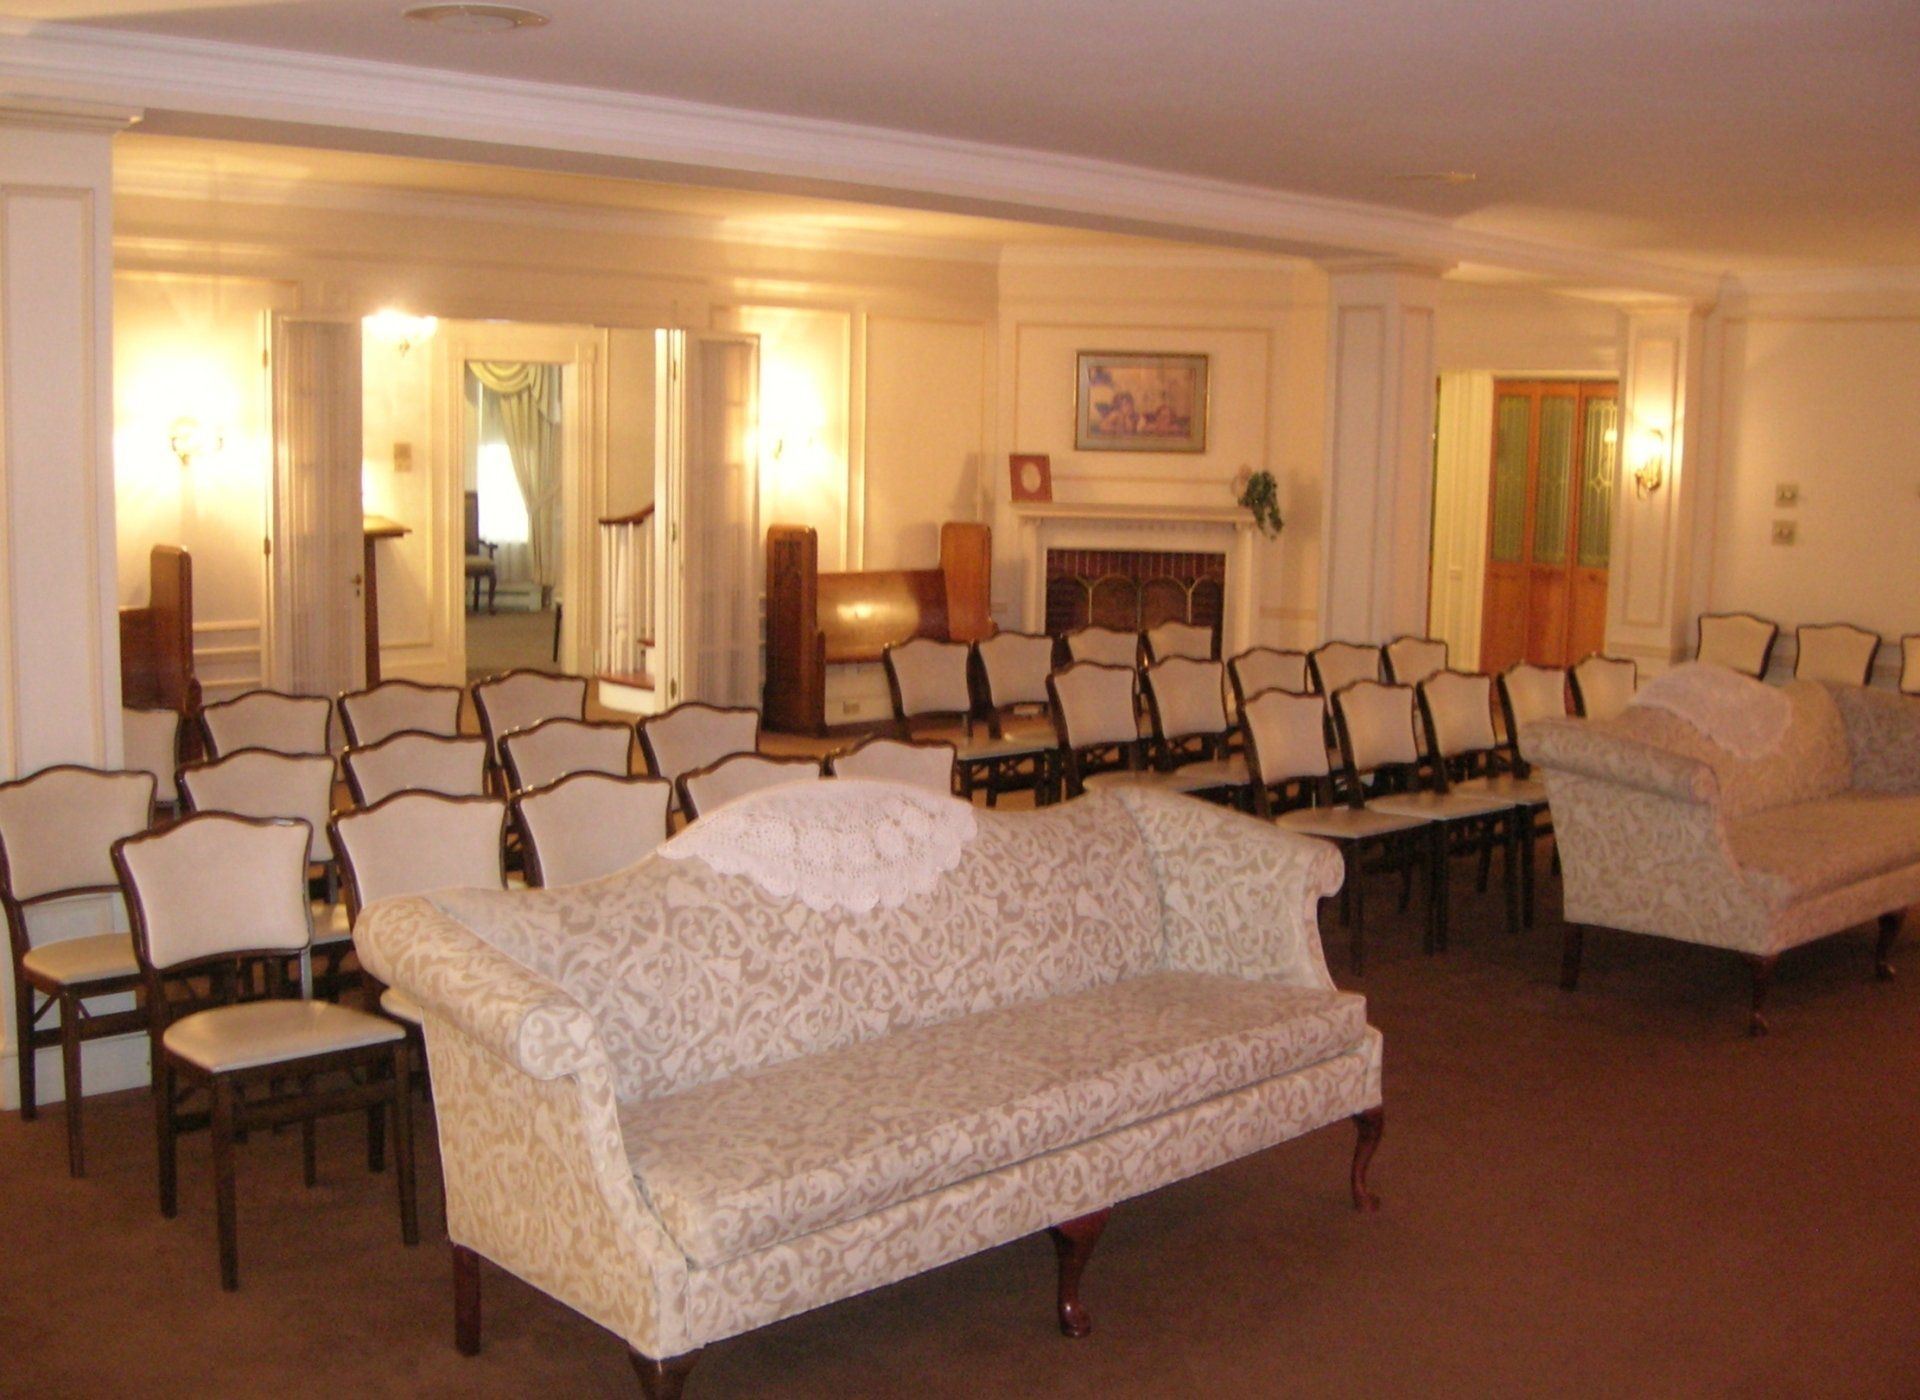 The State Room in Philip J. Brendese Funeral Home